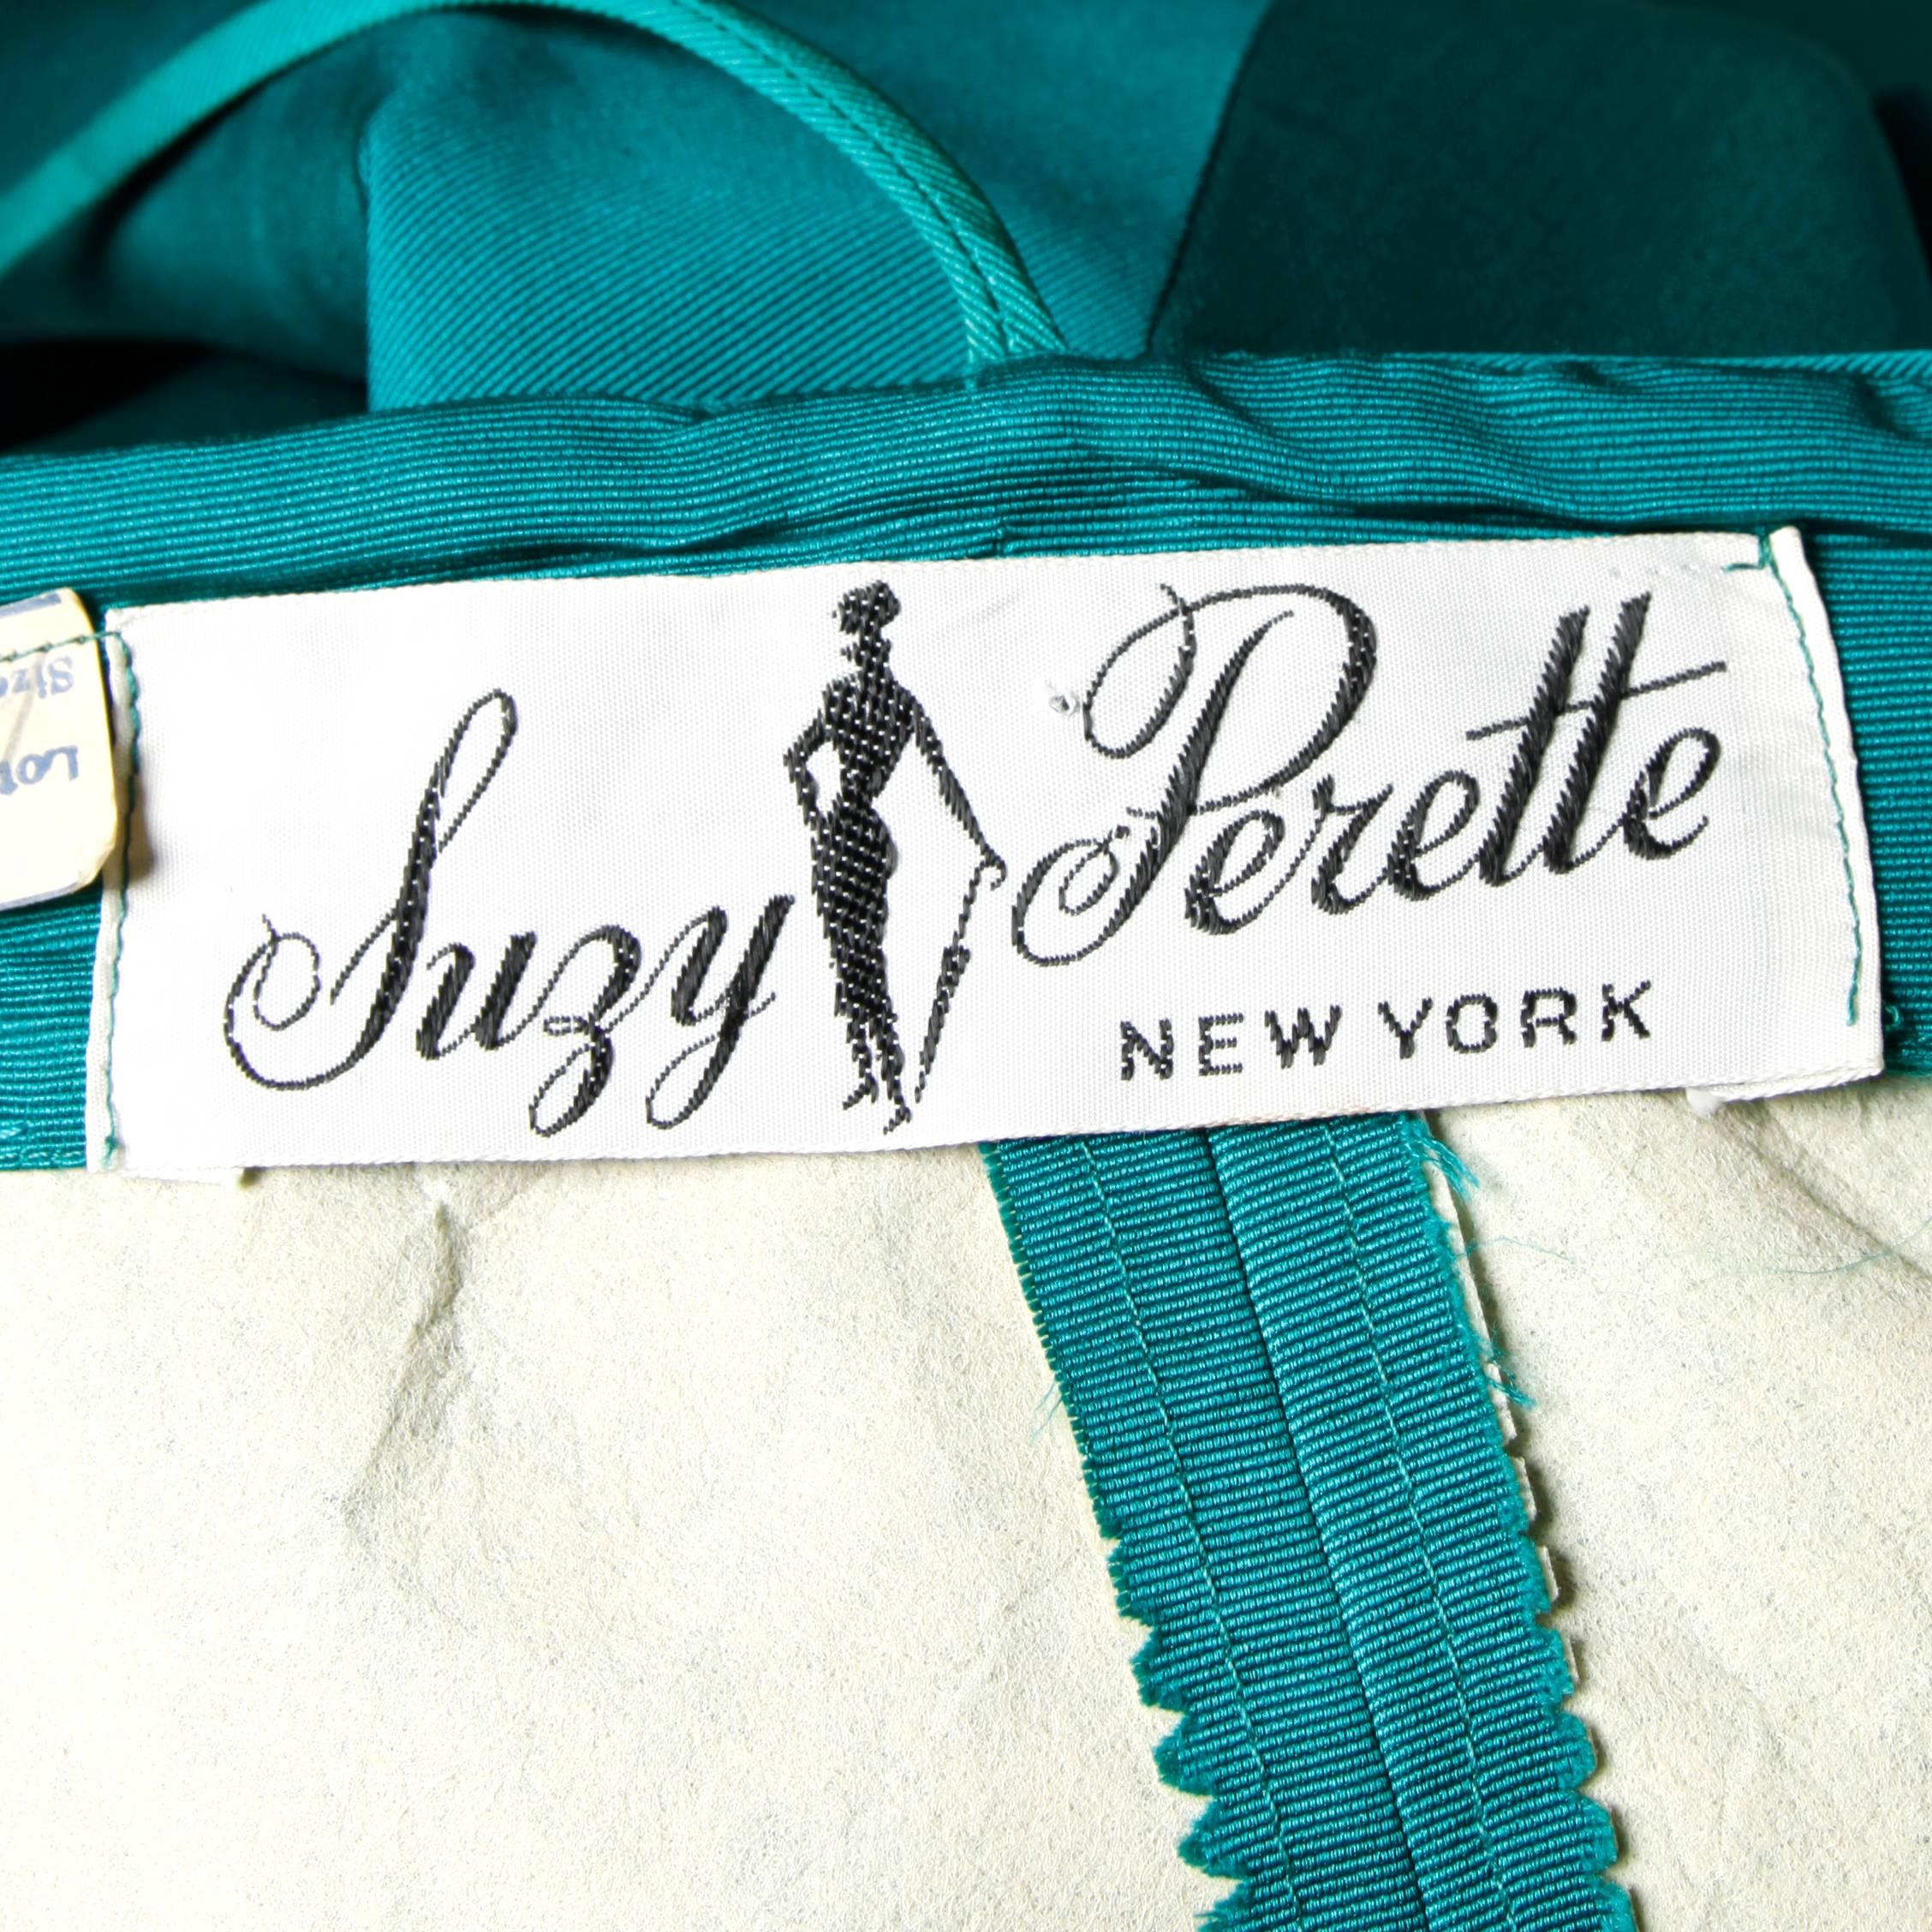 Stunning and unique emerald green silk taffeta dress with an origami bubble hem by Suzy Perette. Bow detail at the bottom and hourglass silhouette. Fits like a modern size small. Please see measurements below.

Details:

Unlined
Back Metal Zip and